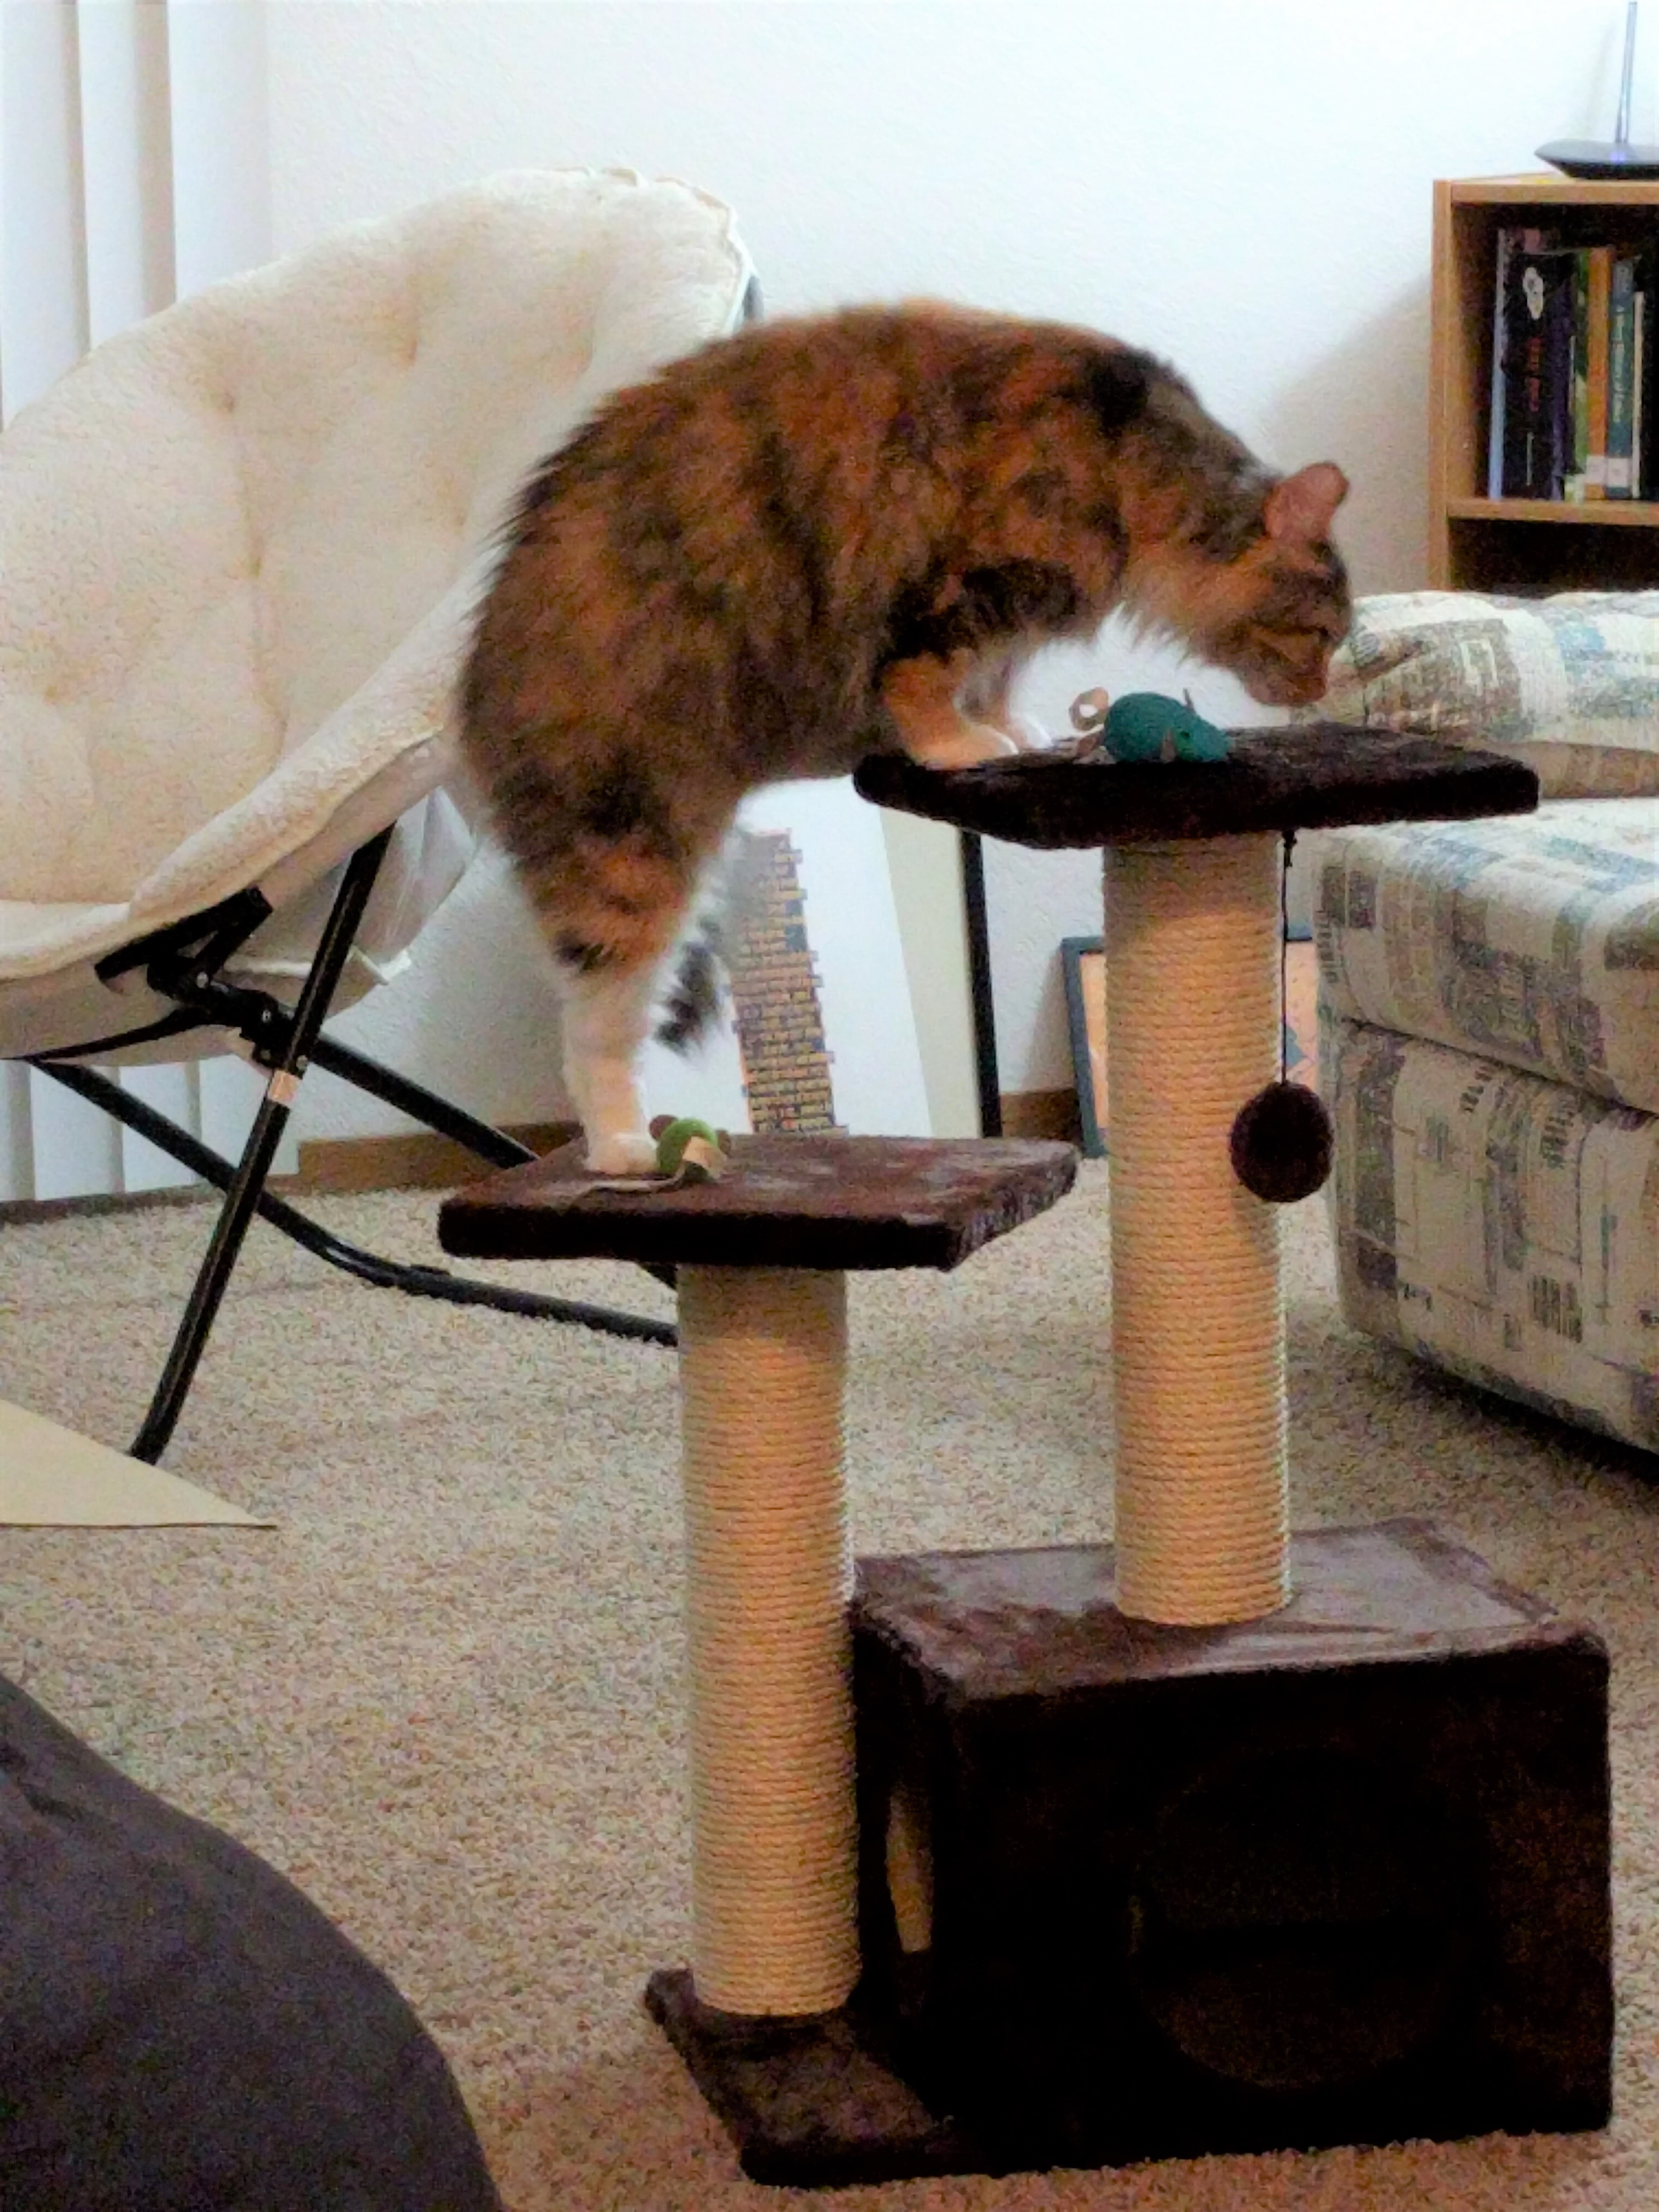 Tally with her hind quarters on one level of a cat tree, and her front paws on the top level